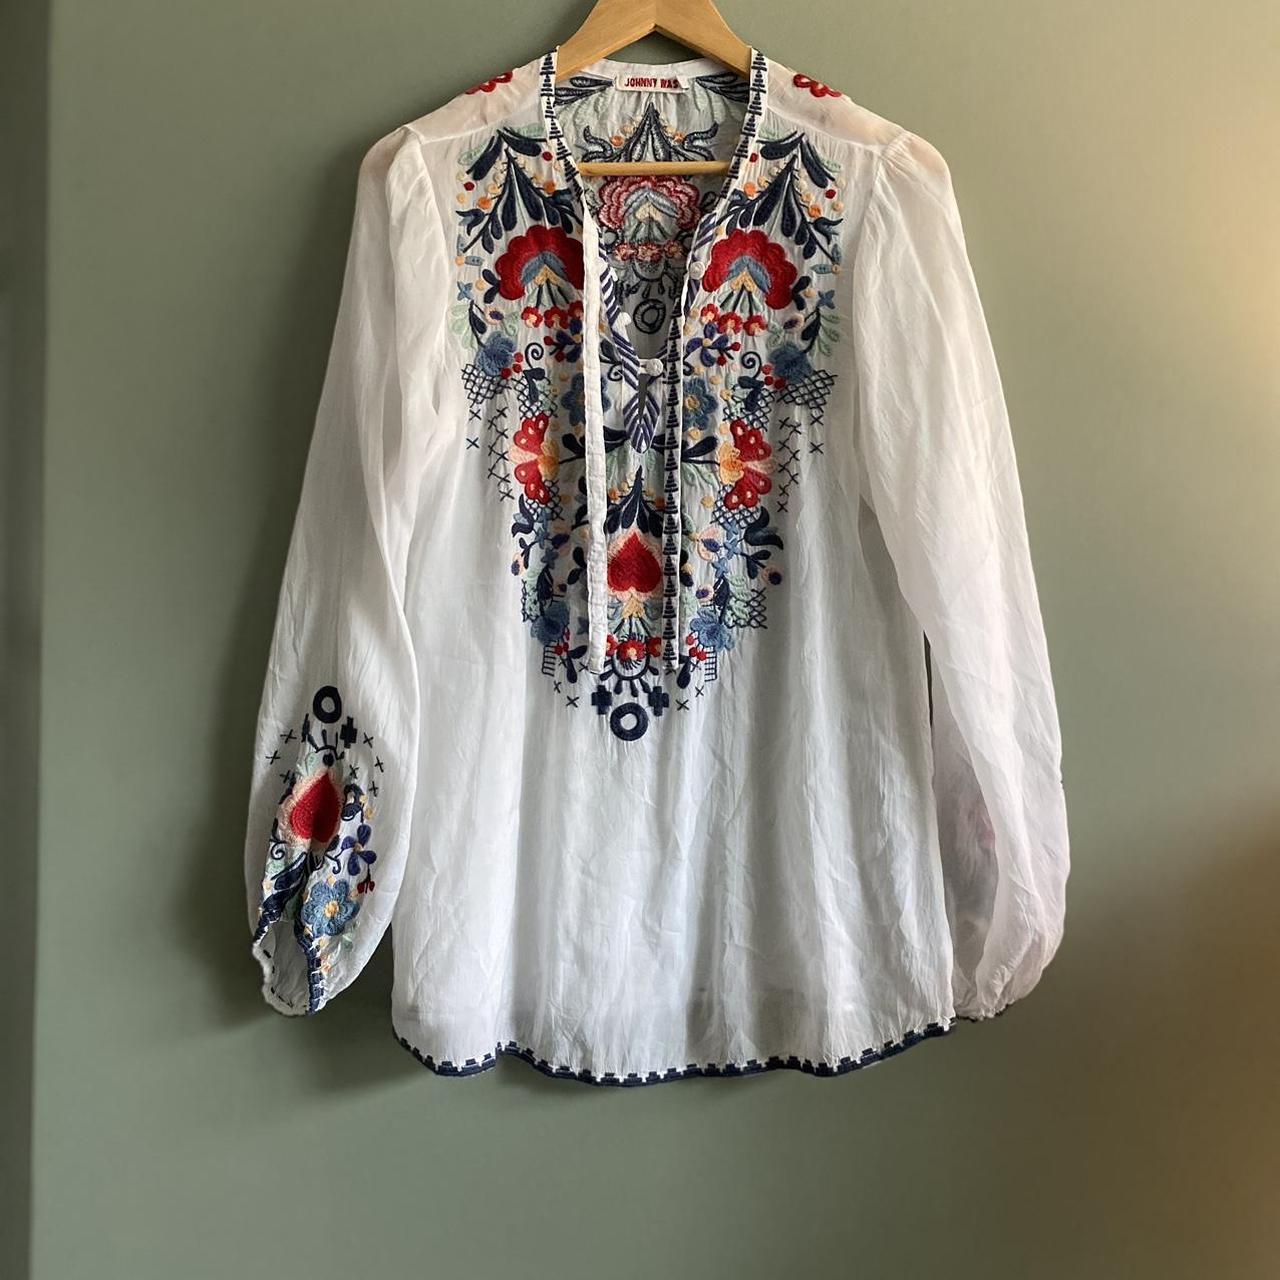 item listed by haventhriftco